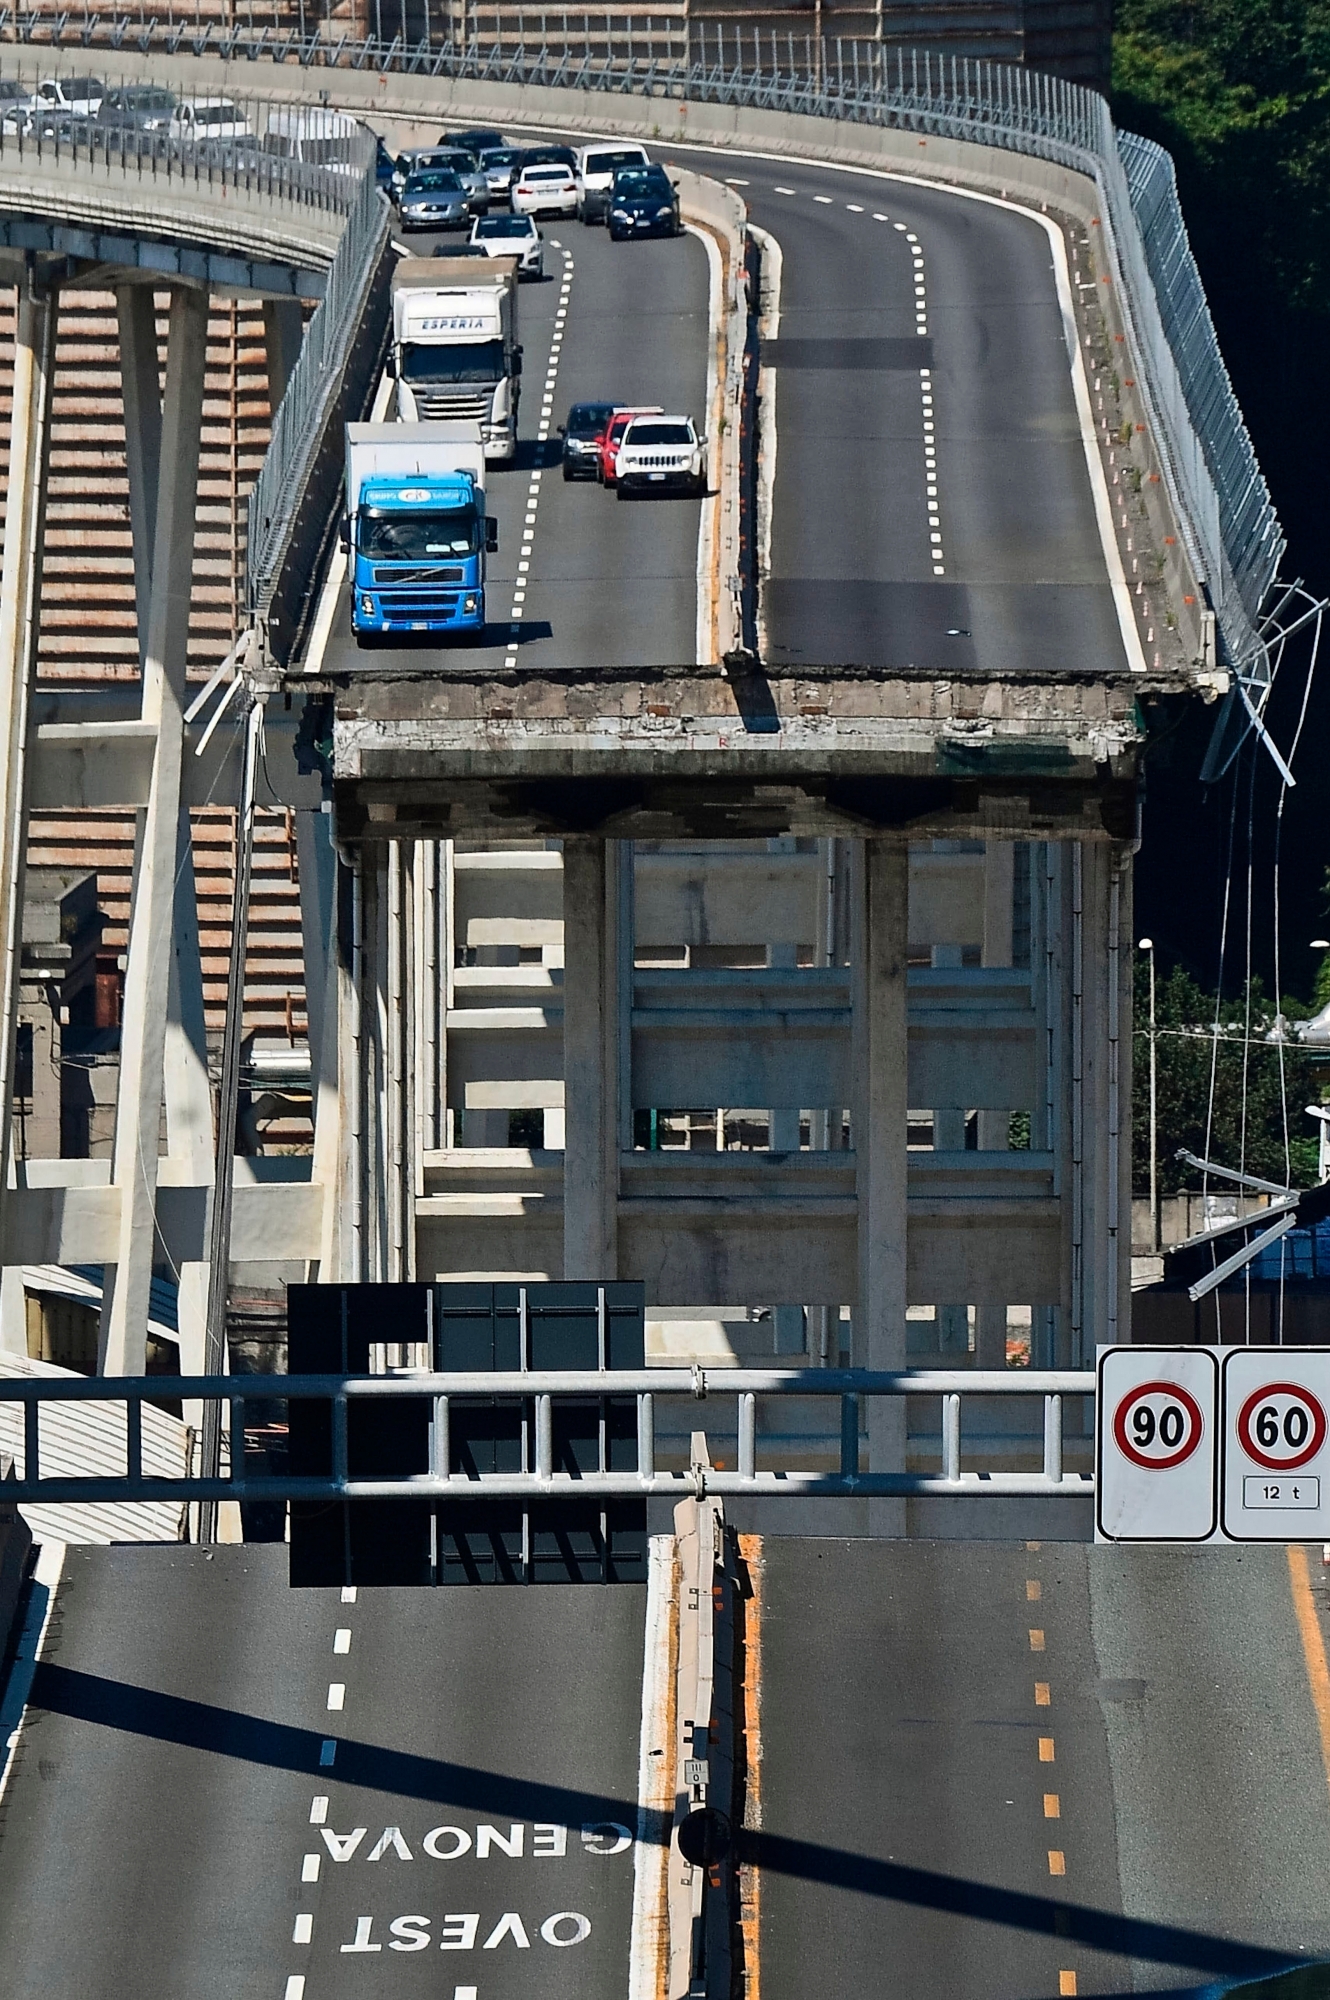 Vehicles are blocked on the collapsed Morandi highway bridge in Genoa, northern Italy, Wednesday, Aug. 15, 2018. A bridge on a main highway linking Italy with France collapsed in the Italian port city of Genoa during a sudden, violent storm, sending vehicles plunging 90 meters (nearly 300 feet) into a heap of rubble below.  (Luca Zennaro/ANSA via AP) Italy Highway Collapse